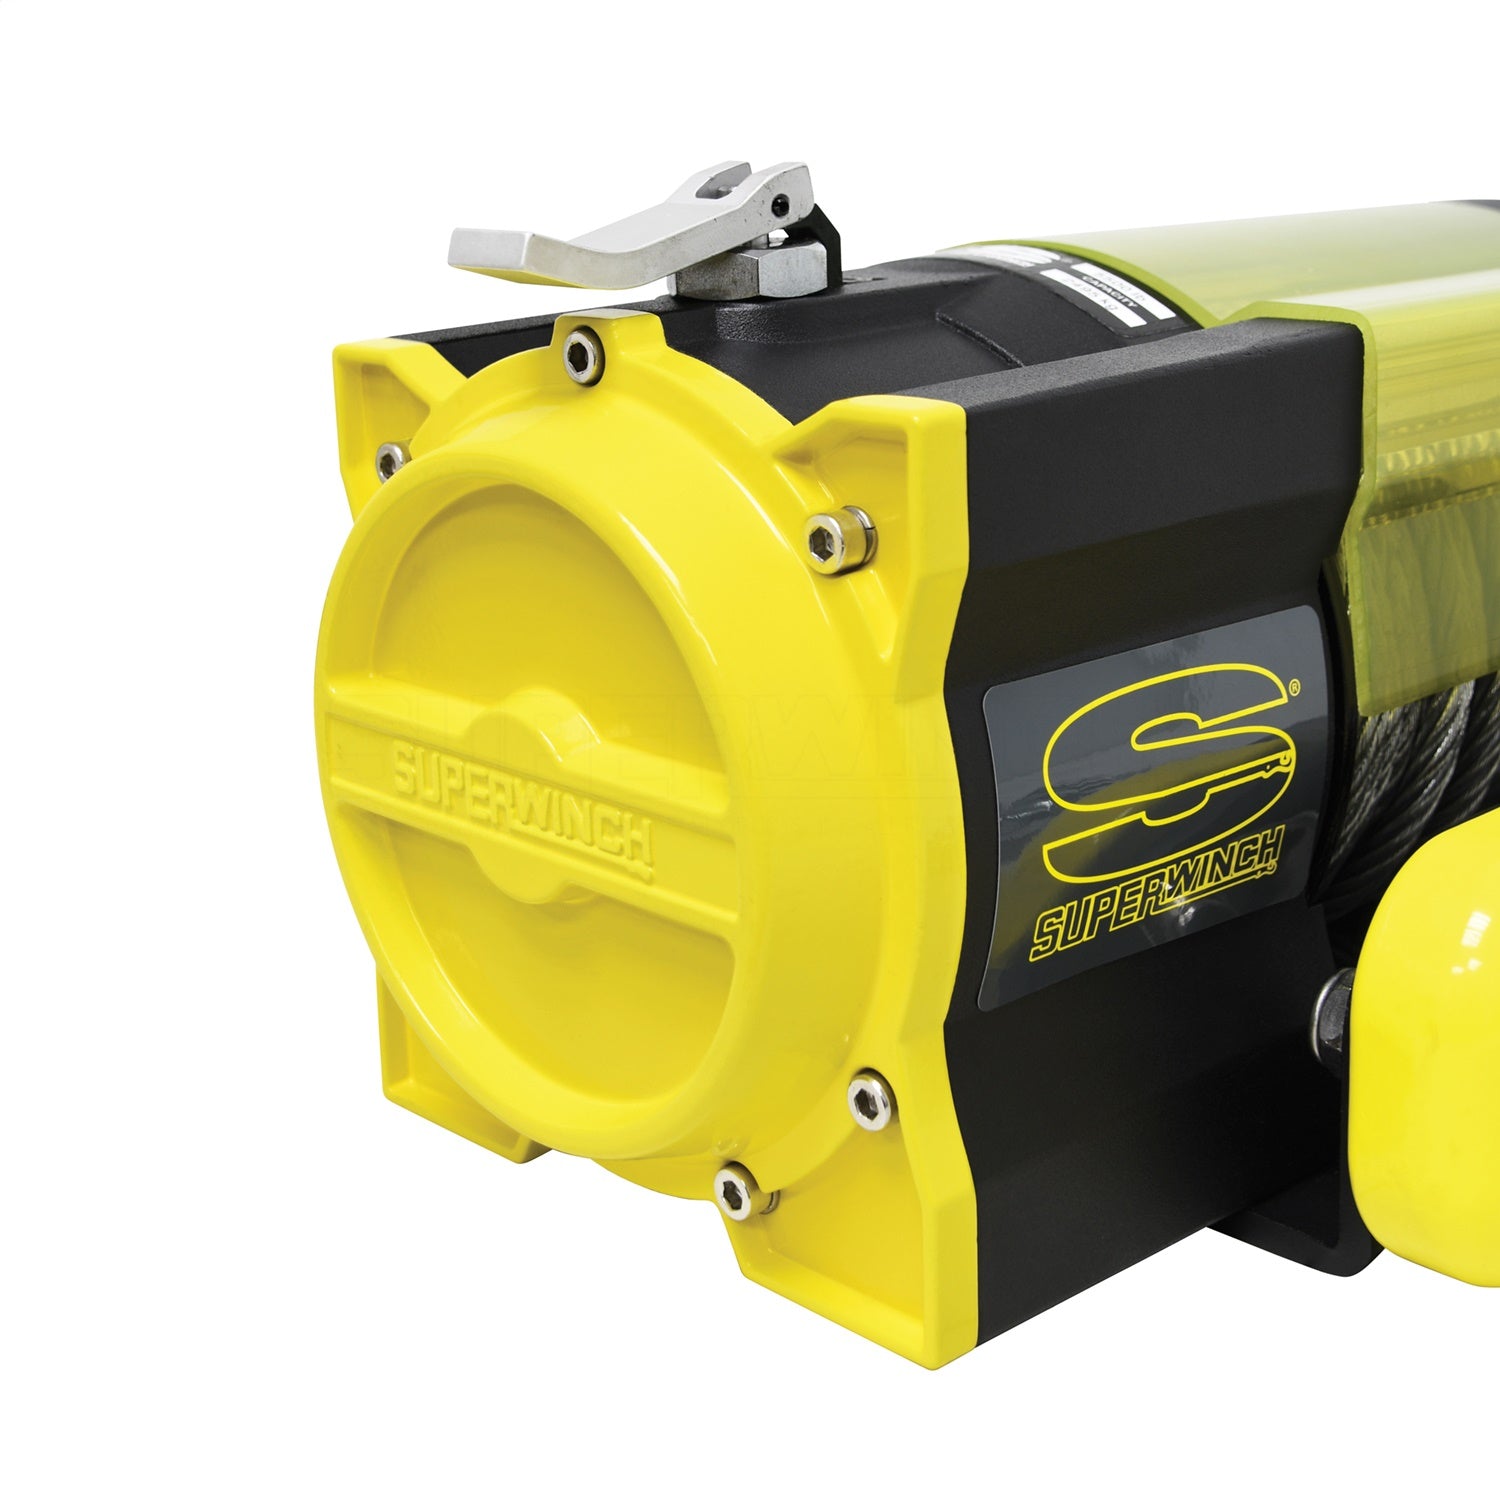 S5500 Winch; 5500 lbs.; 3.6hp; 12V; 7/32 in. x 60 ft. Steel Rope; Yellow;